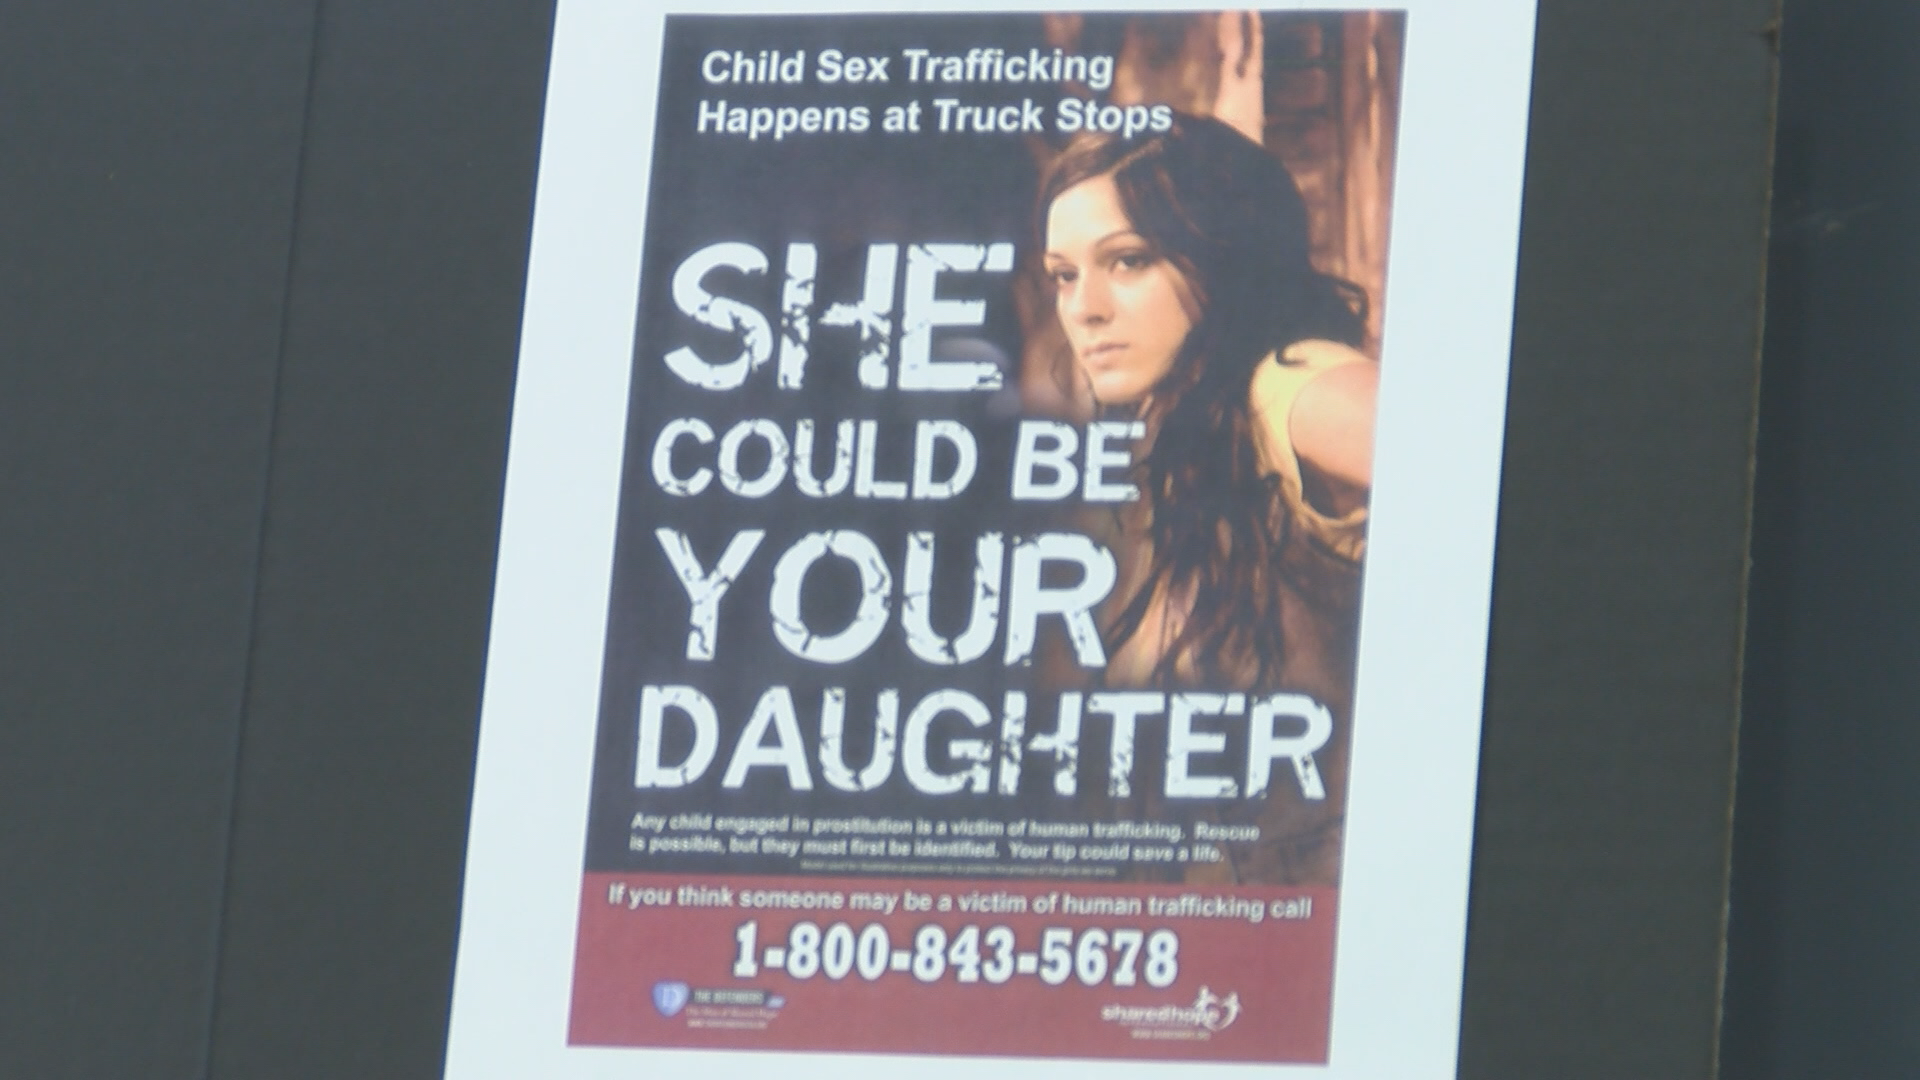 Savannah State holds annual conference to combat human trafficking